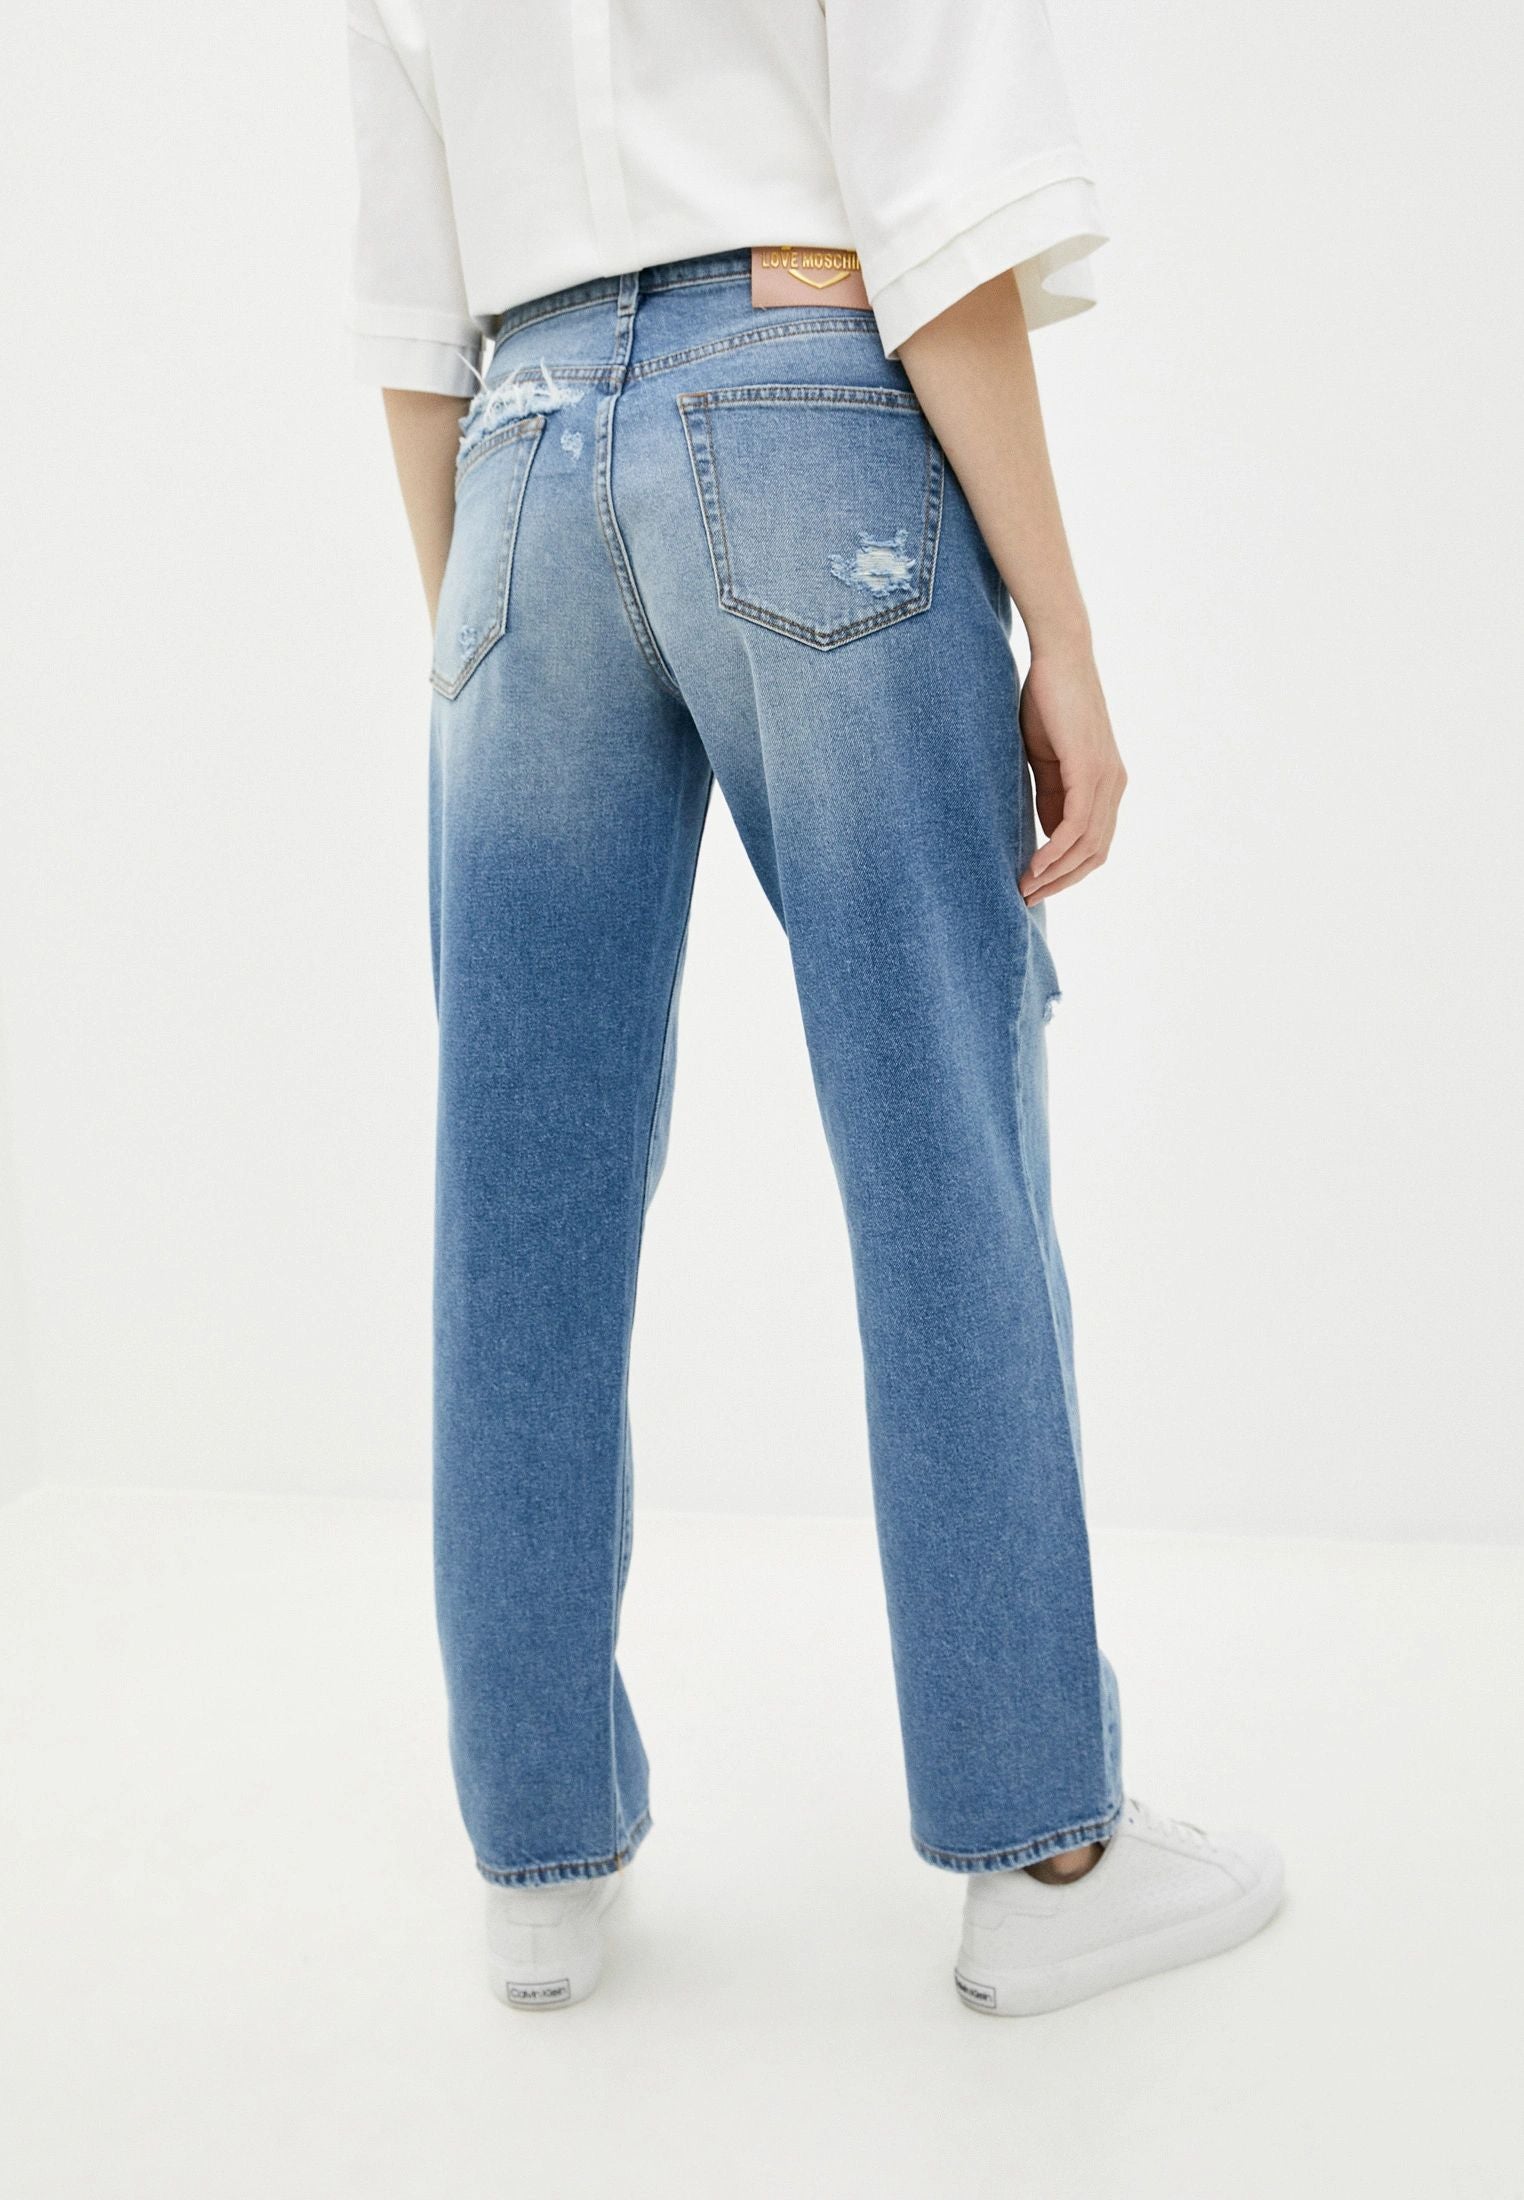 Chic Distressed Love Moschino Jeans